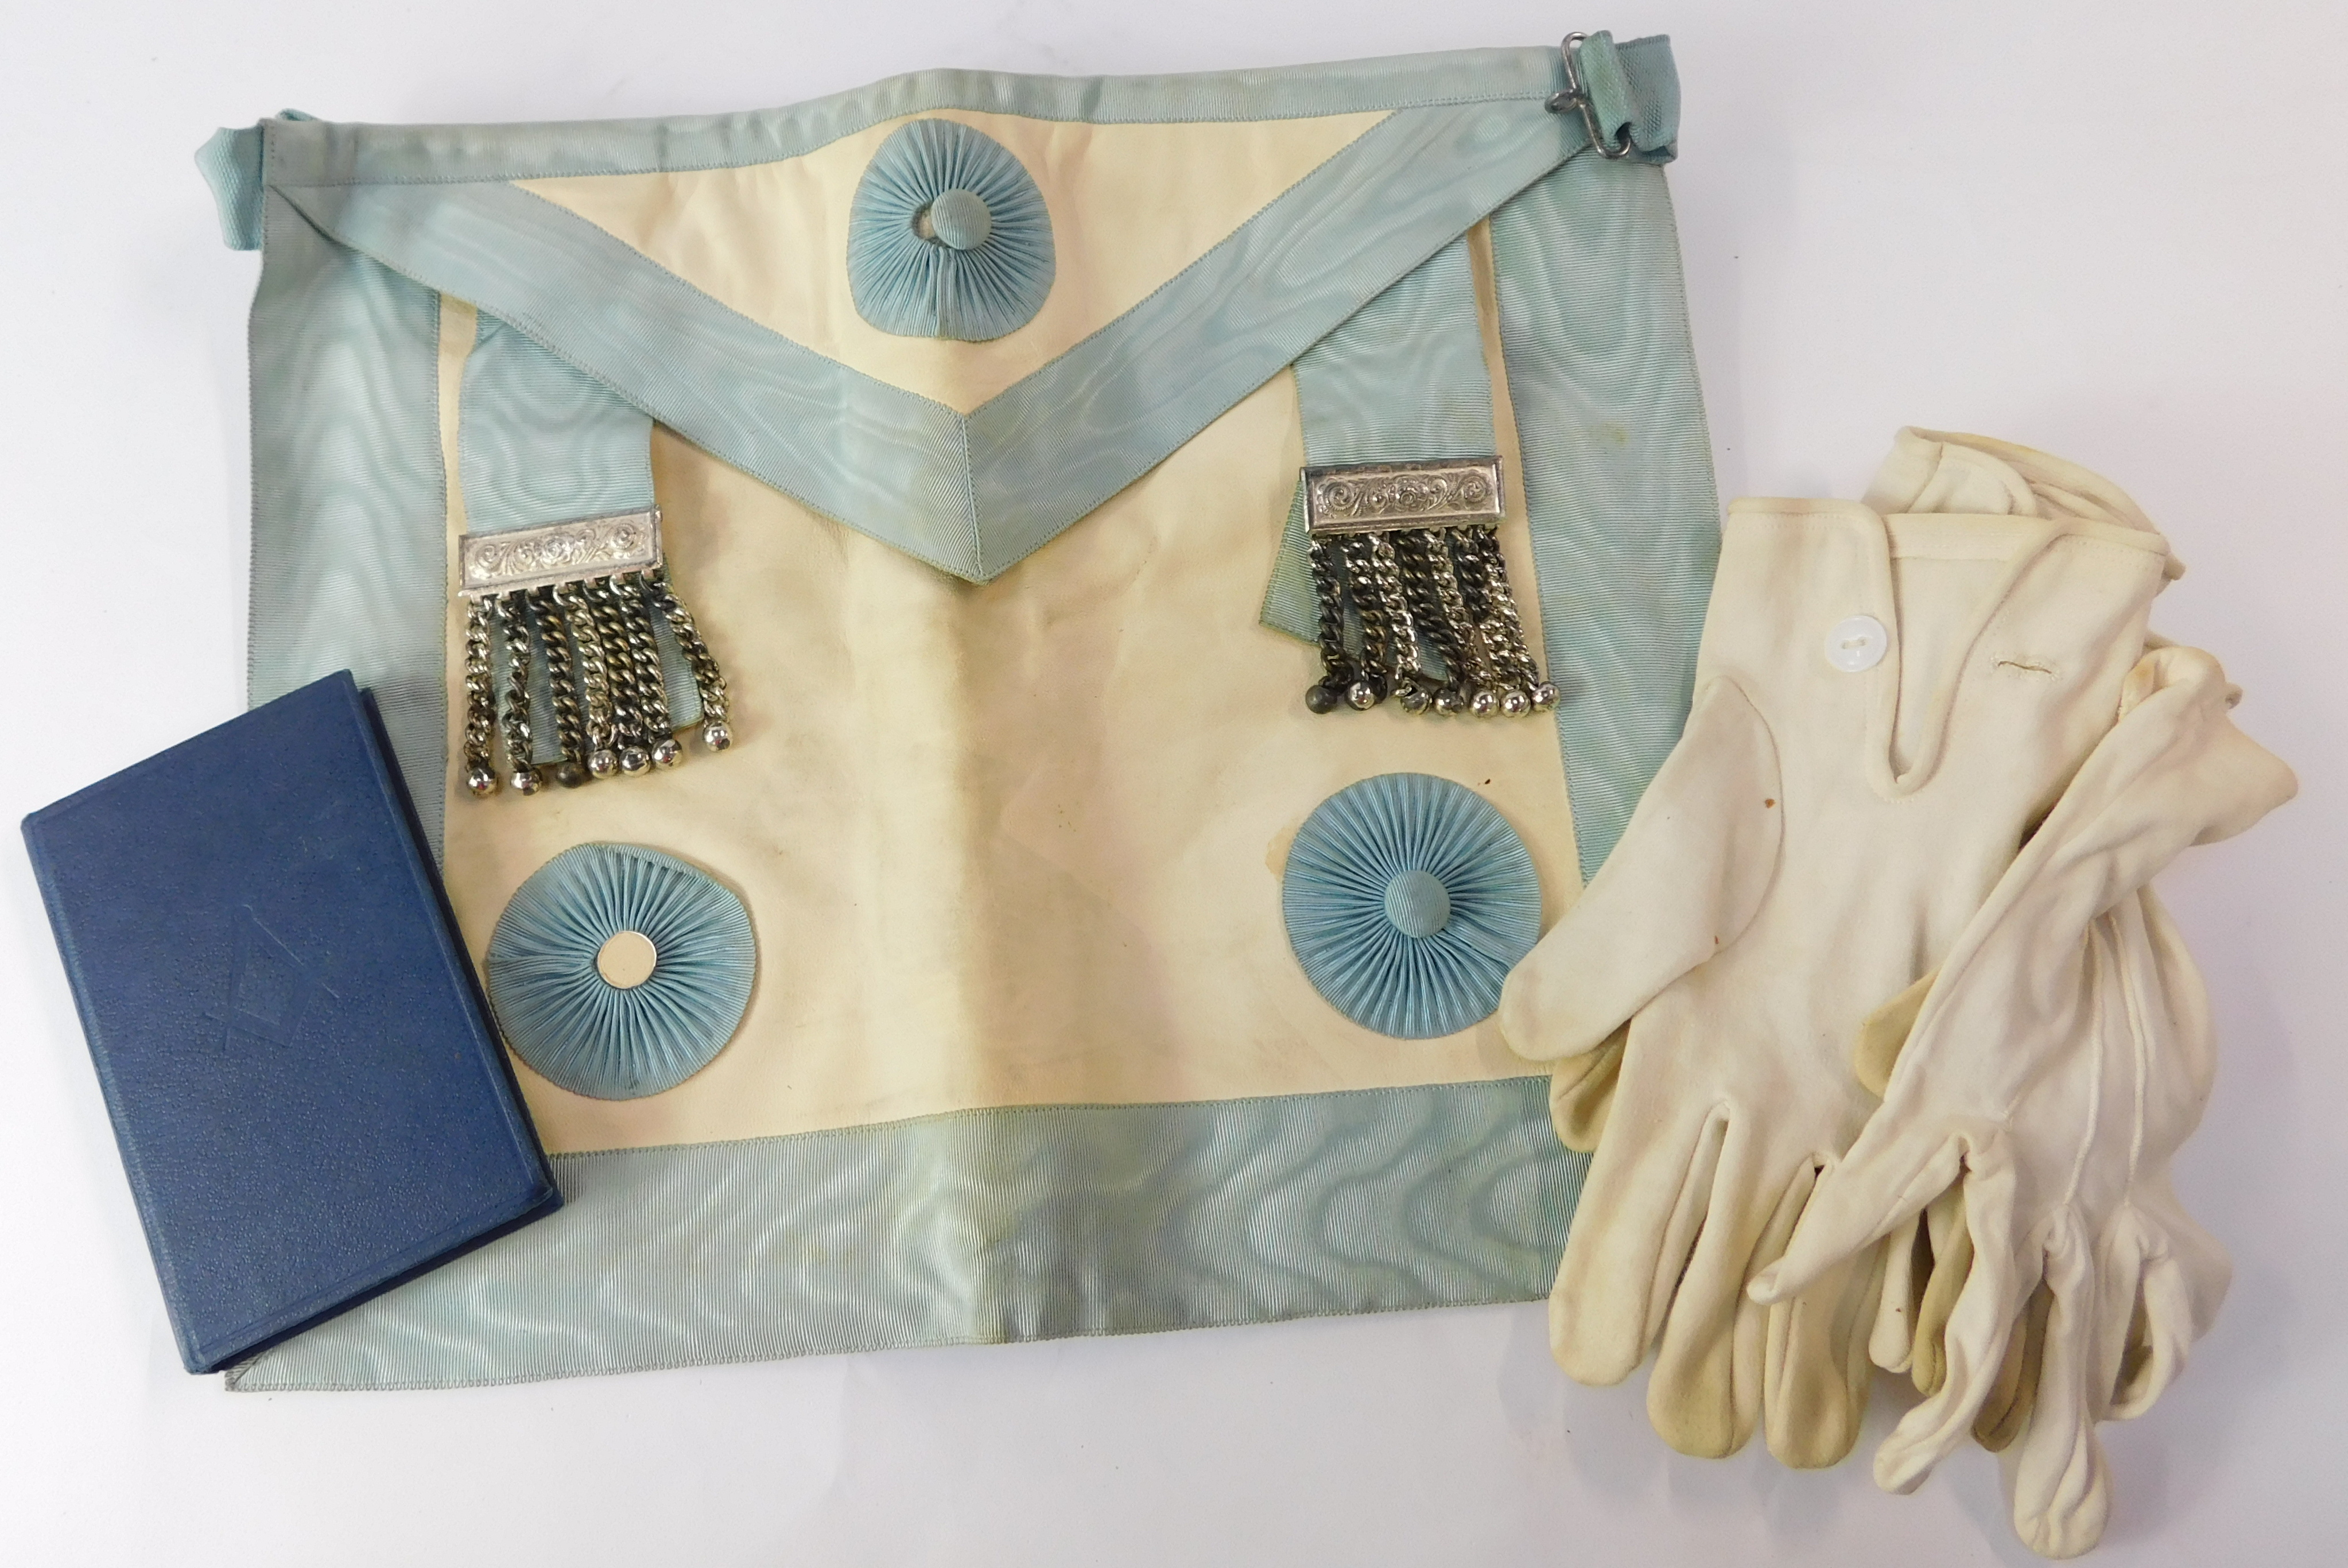 A leather case containing Masonic related items, aprons etc. - Image 2 of 4